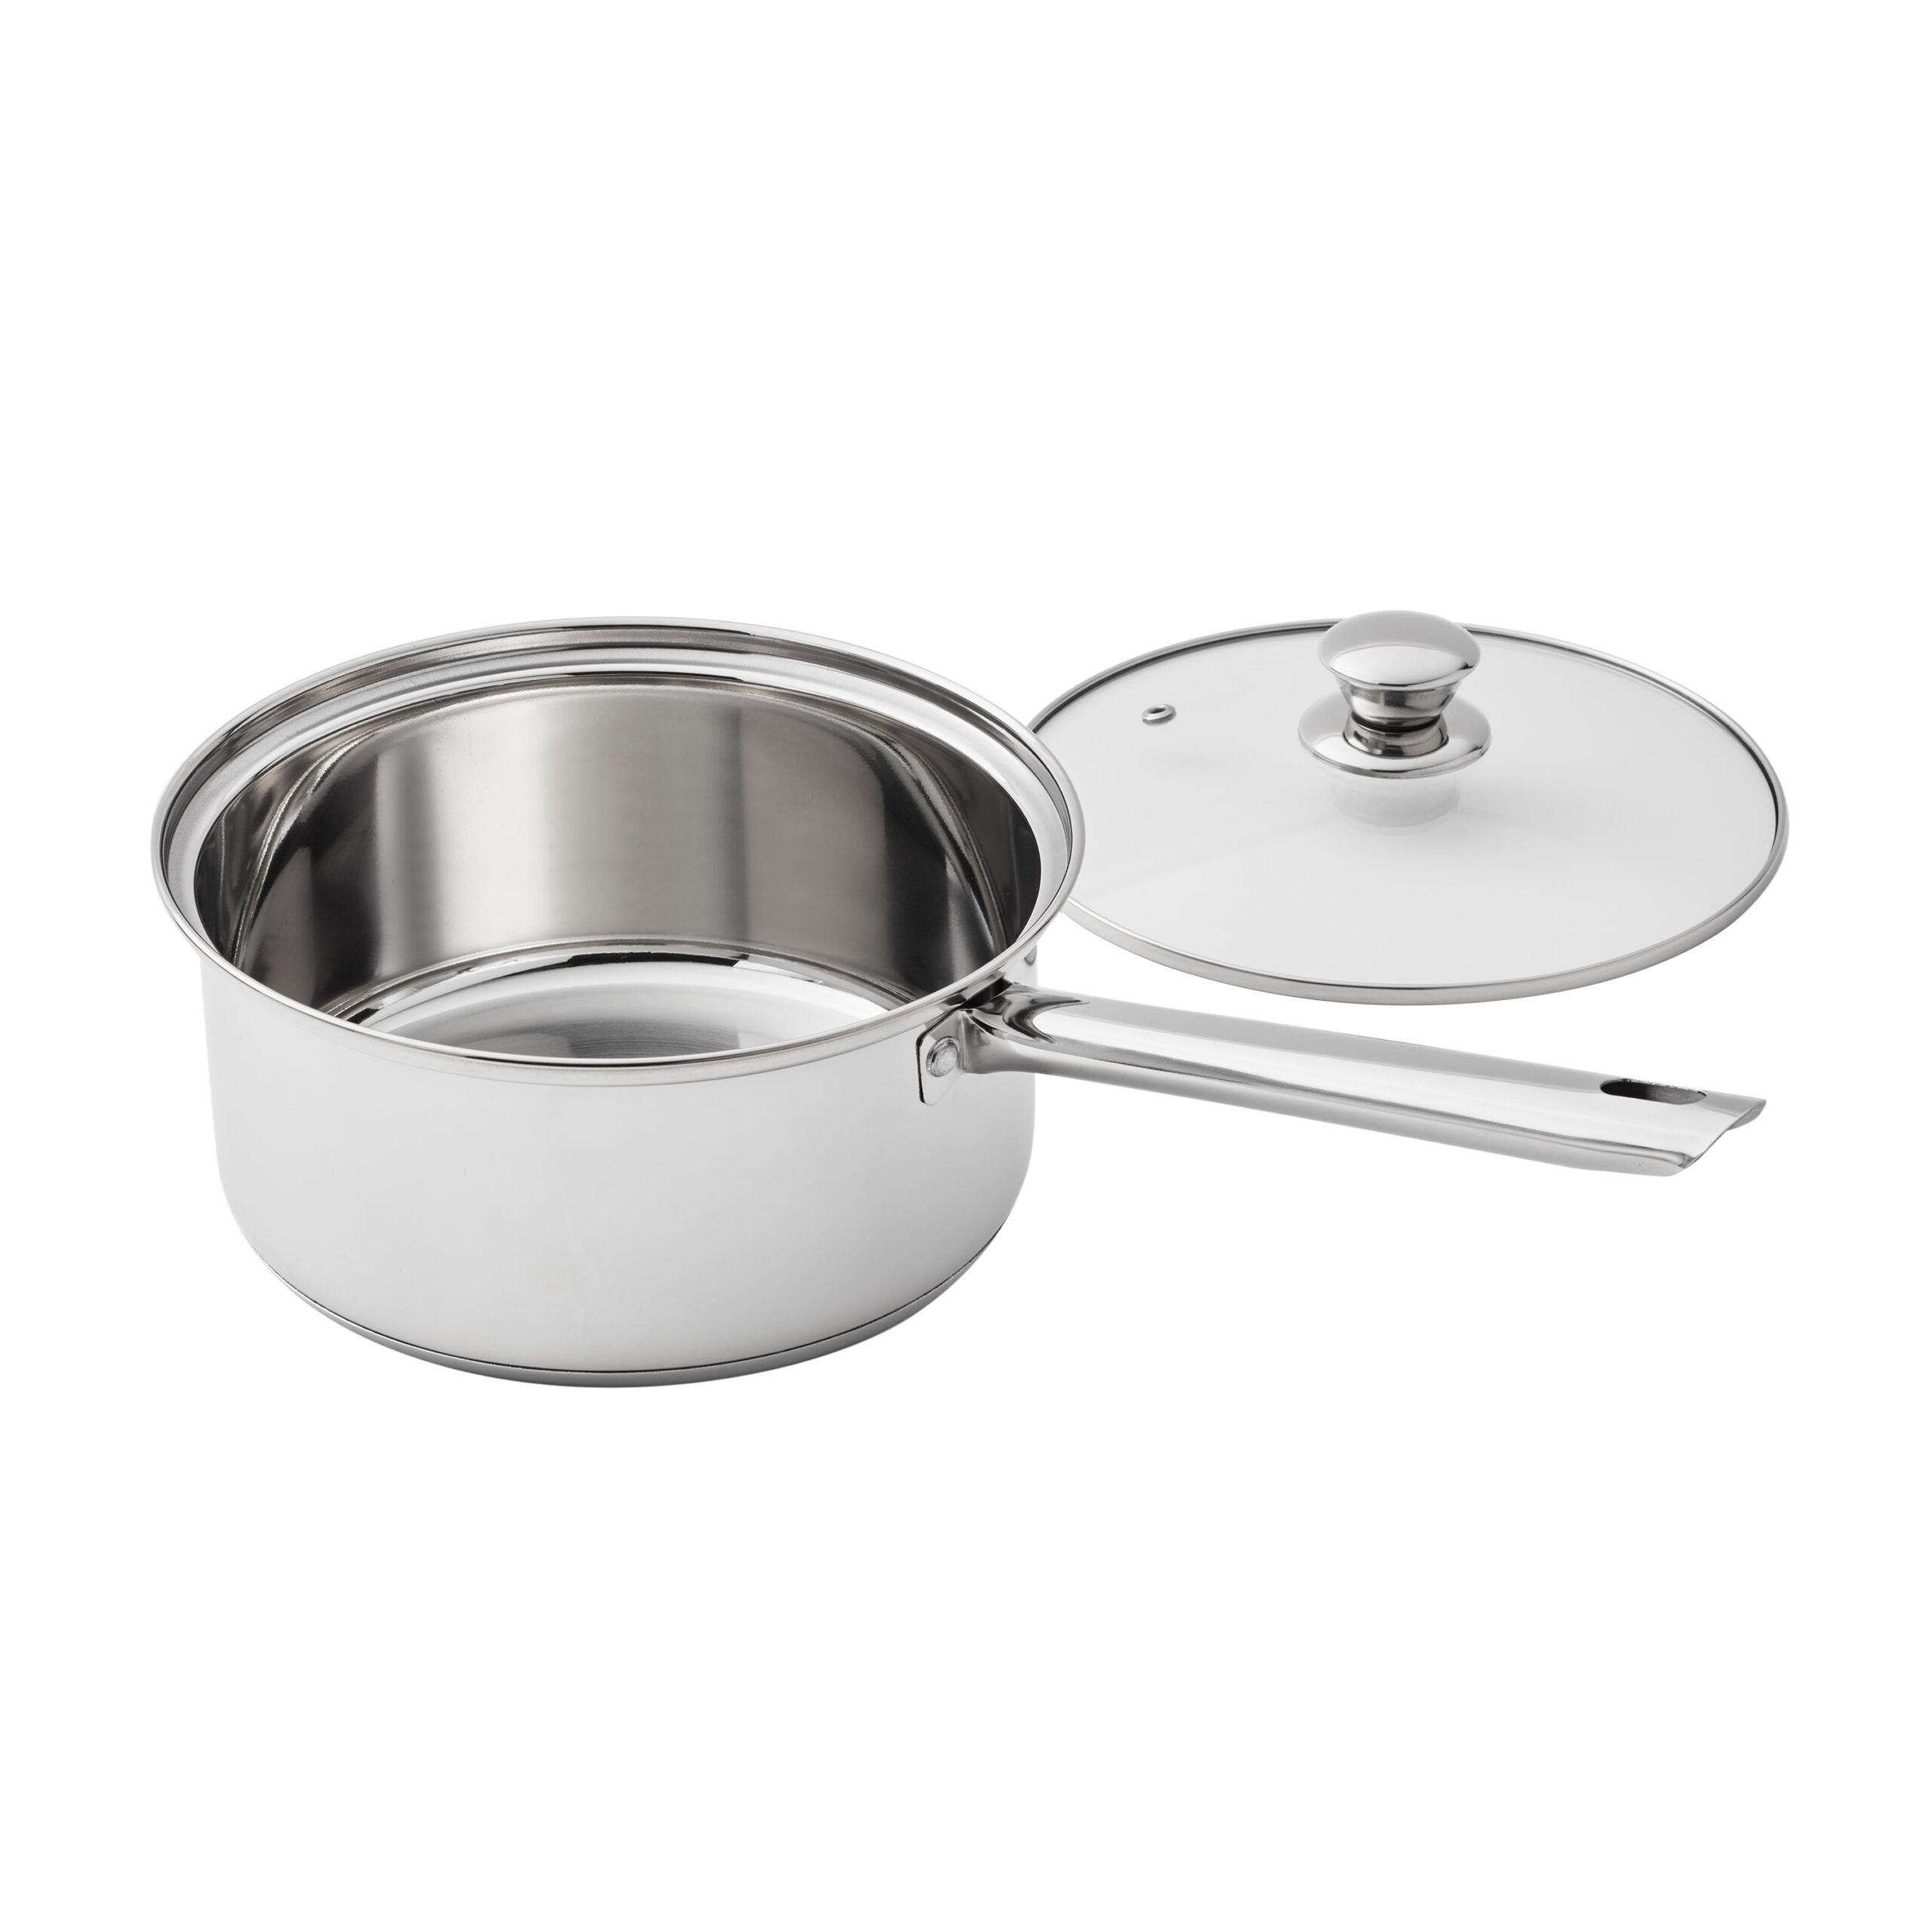 Mainstays Stainless Steel Mixing Bowl